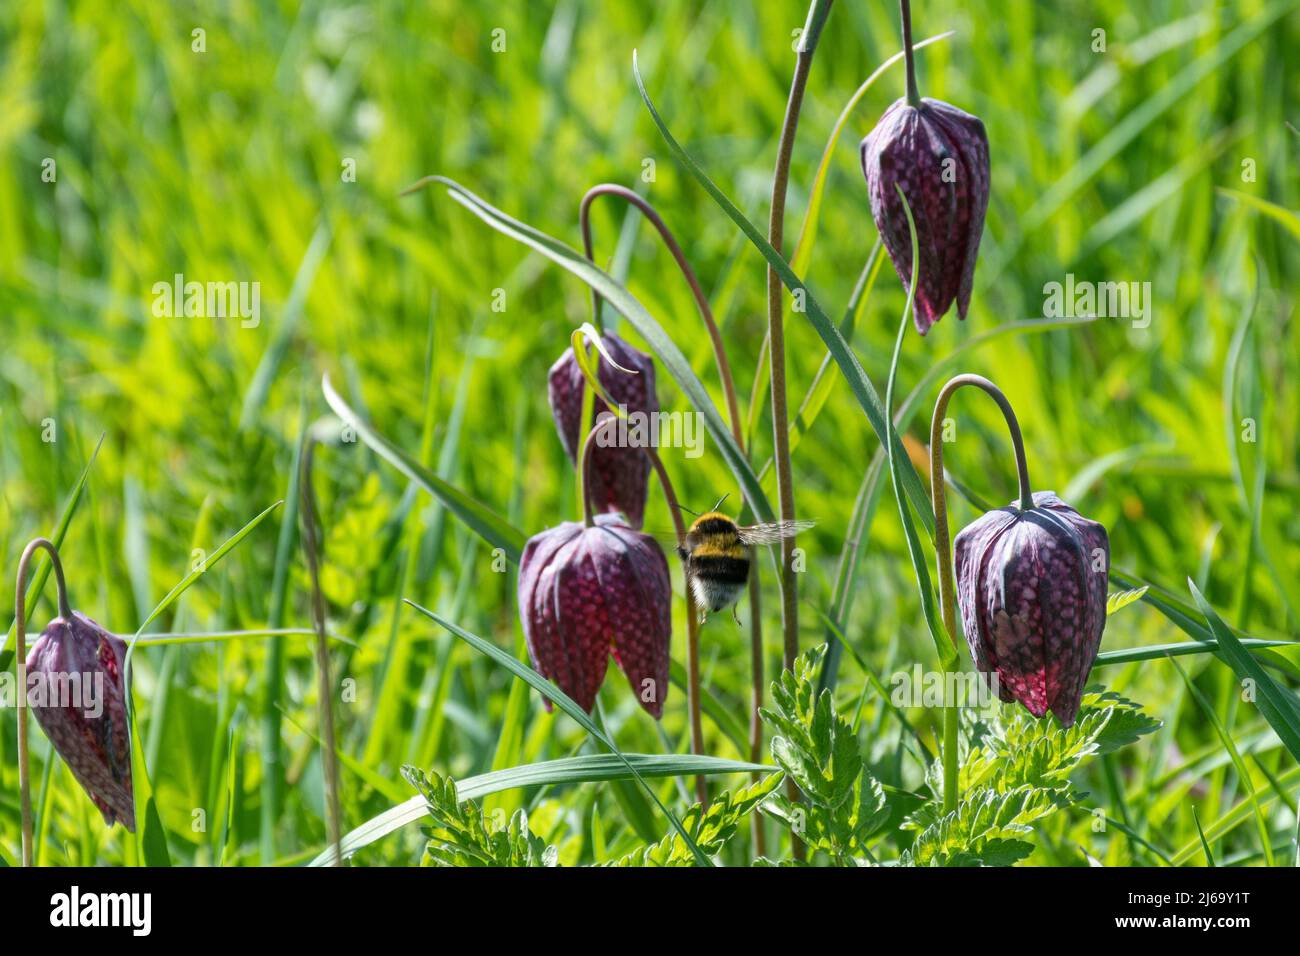 Bumblebee and snakeshead fritillaries (Fritillaria meleagris, snakes-head fritillary) in a wet wildflower meadow, Oxfordshire, England, UK Stock Photo